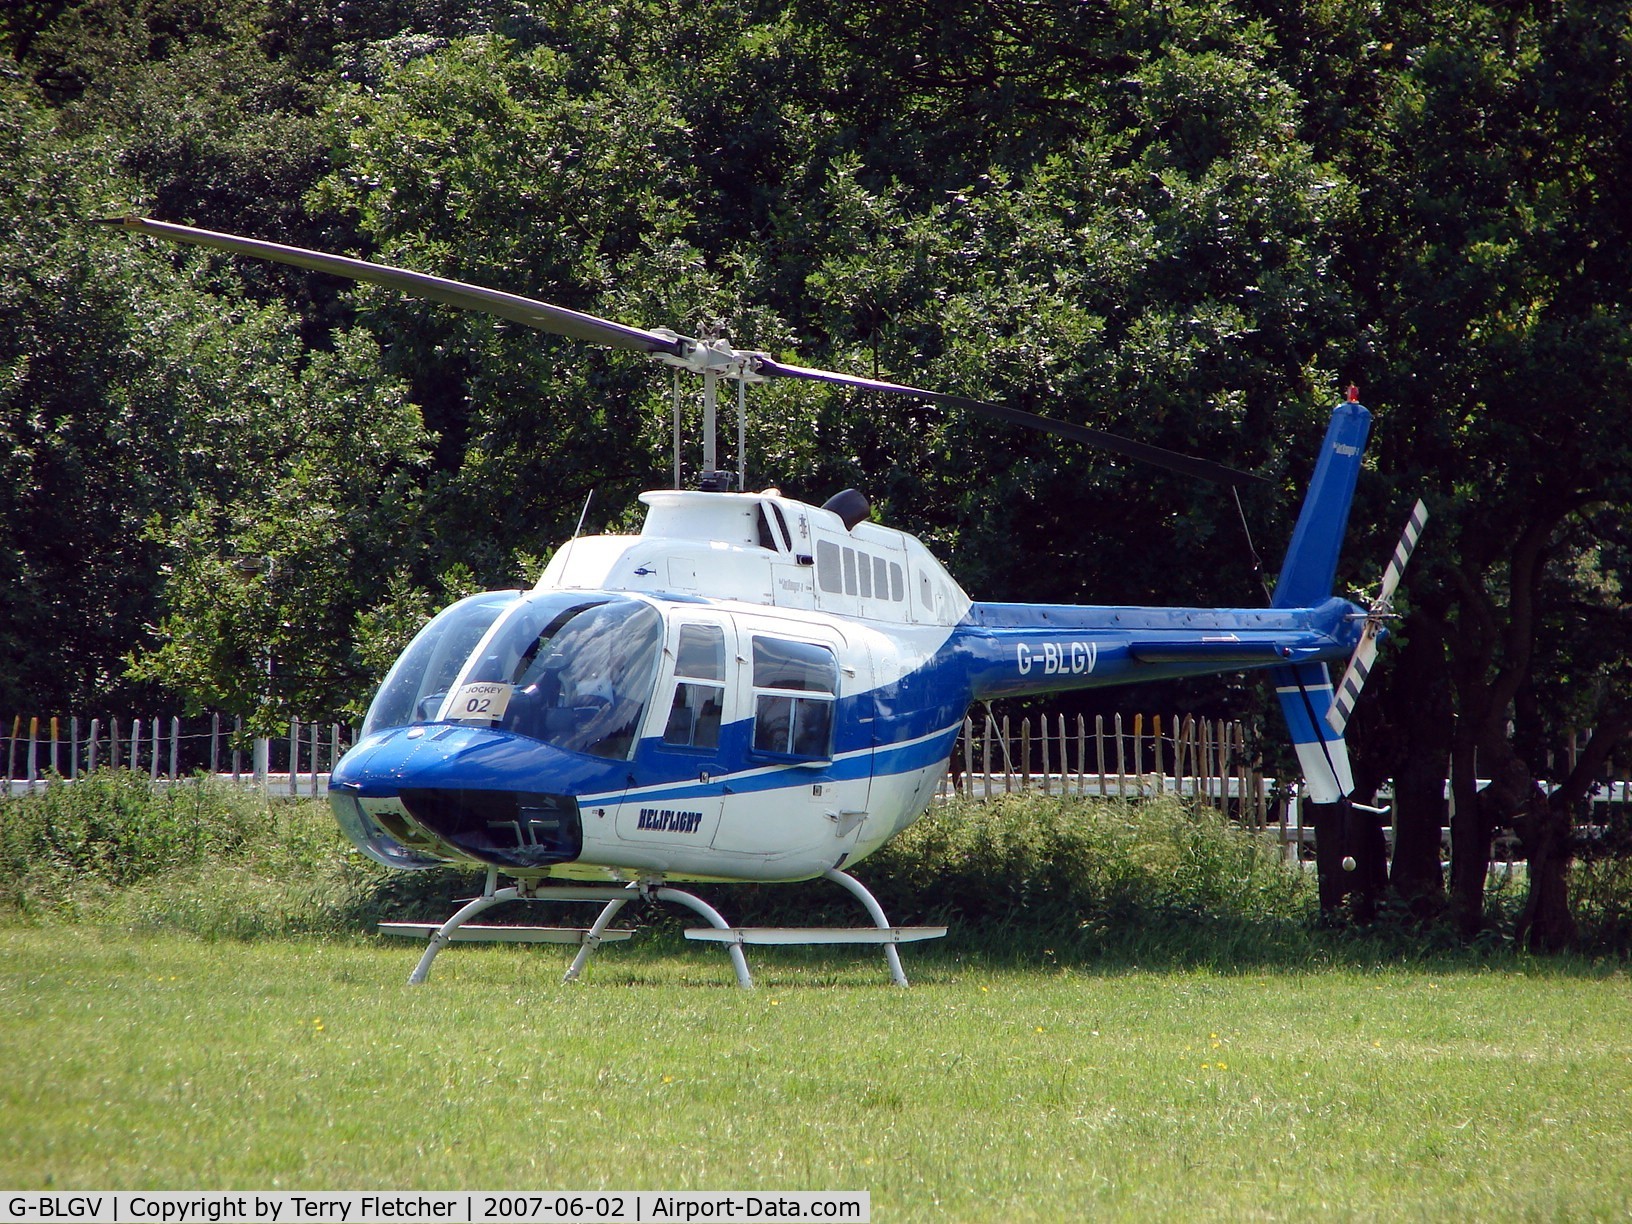 G-BLGV, 1973 Bell 206B JetRanger II C/N 982, Helicopters arrive at the temporary Heliport on 2007 Epsom Derby Day (Horse racing)